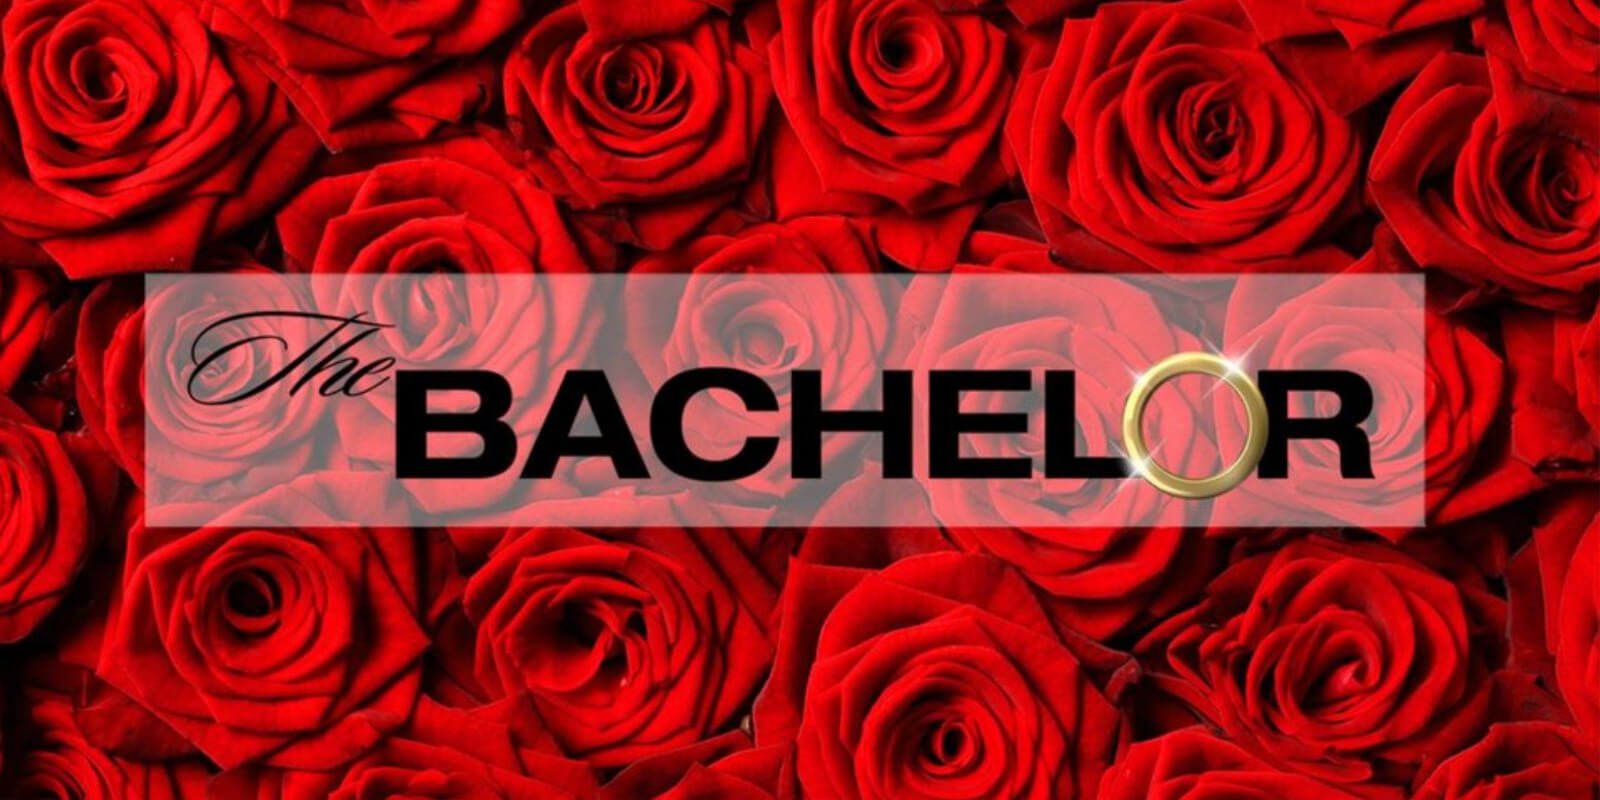 Logo for ABC's 'The Bachelor' includes red roses, black type and a gold wedding band.